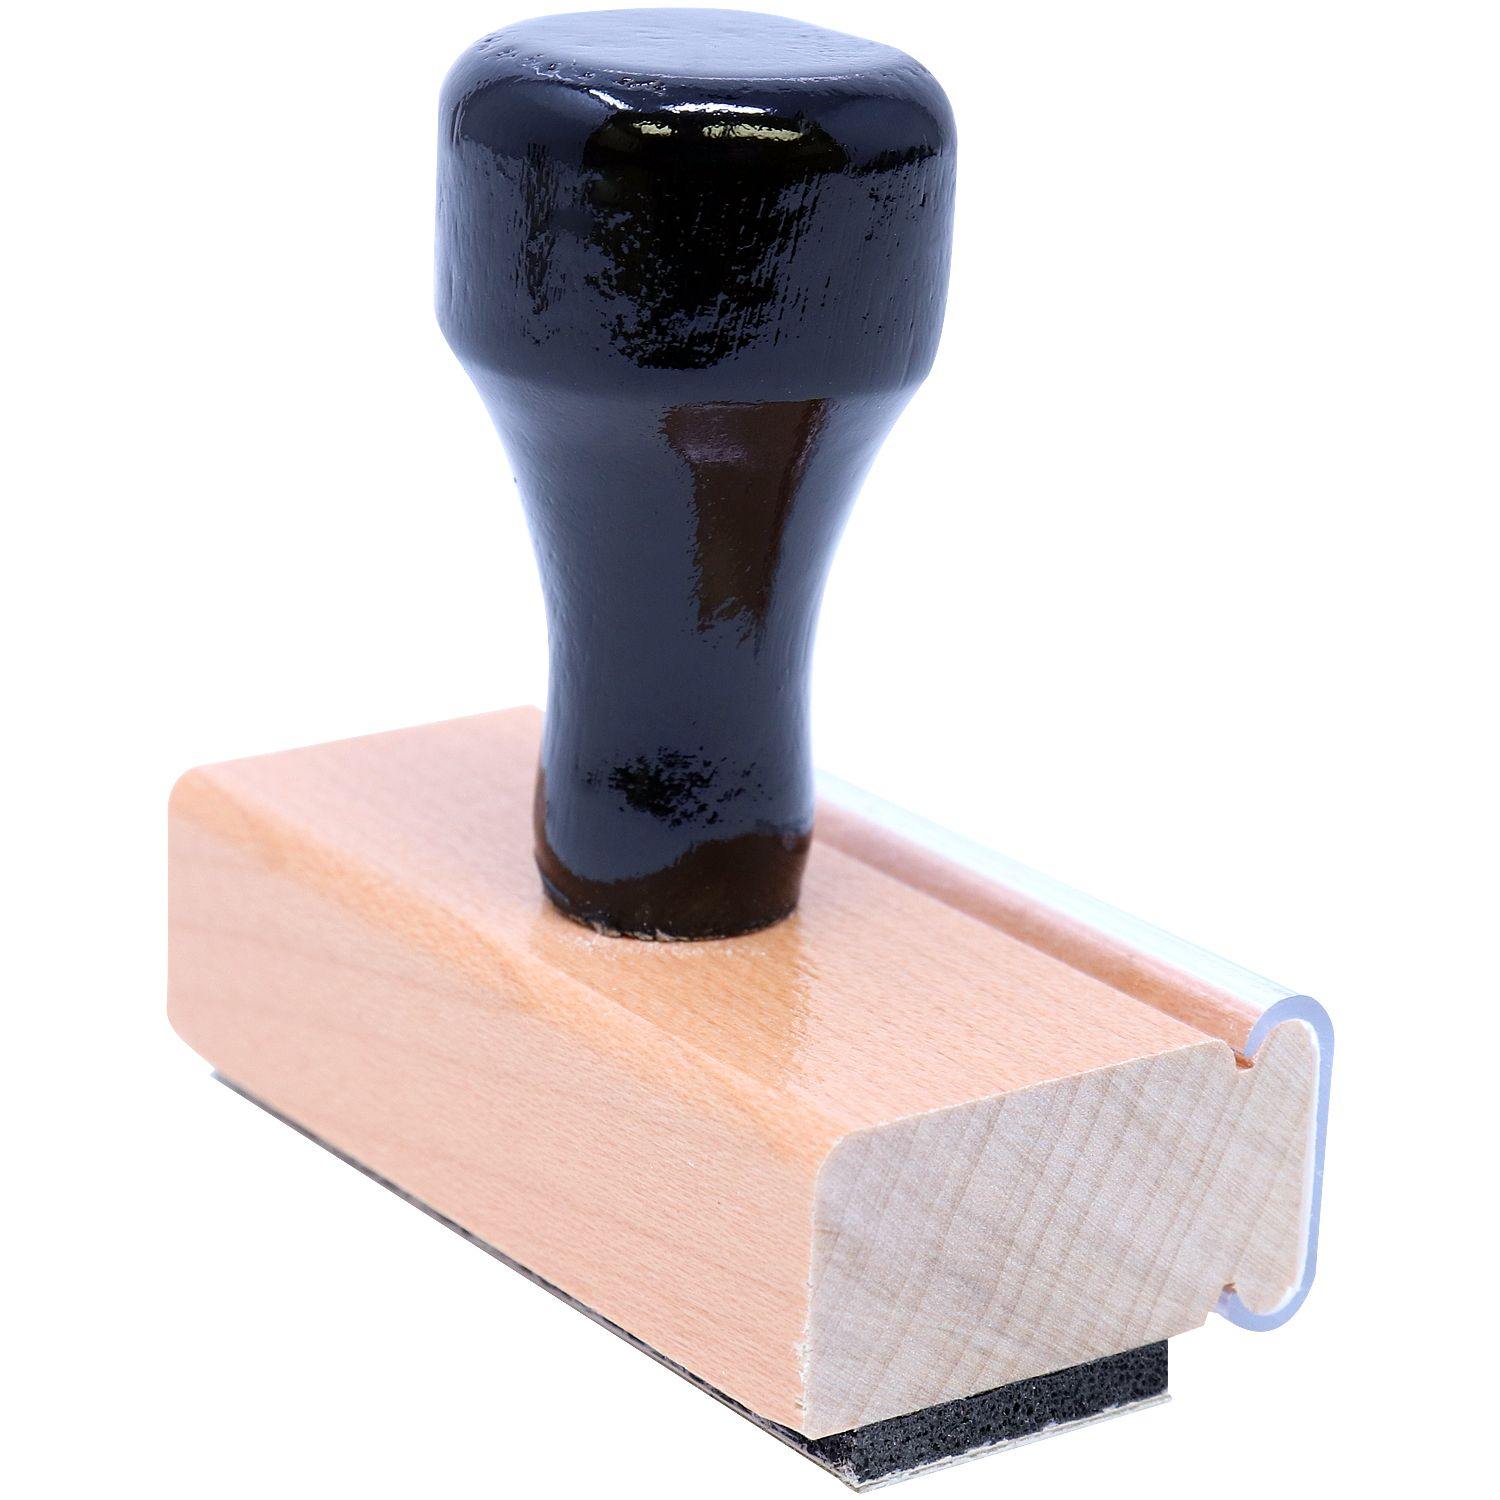 Narrow Expedite Rubber Stamp - Engineer Seal Stamps - Brand_Acorn, Impression Size_Small, Stamp Type_Regular Stamp, Type of Use_Postal & Mailing, Type of Use_Shipping & Receiving